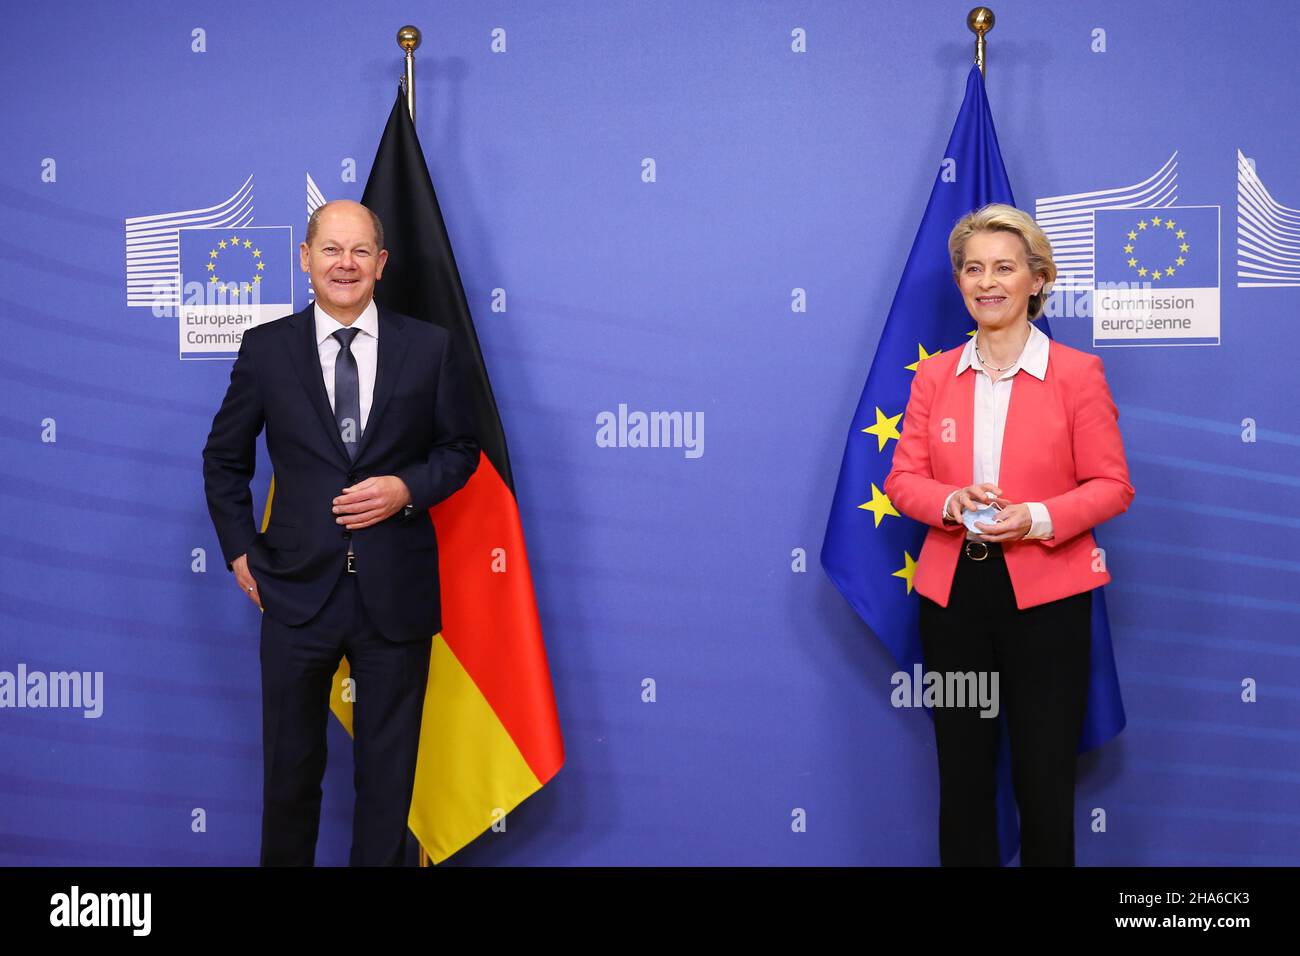 Brussels, Belgium. 10th Dec, 2021. European Commission President Ursula von der Leyen (R) and German Chancellor Olaf Scholz pose for a photo in Brussels, Belgium, on Dec. 10, 2021. Olaf Scholz met with Ursula von der Leyen here on Friday. Credit: Zheng Huansong/Xinhua/Alamy Live News Stock Photo